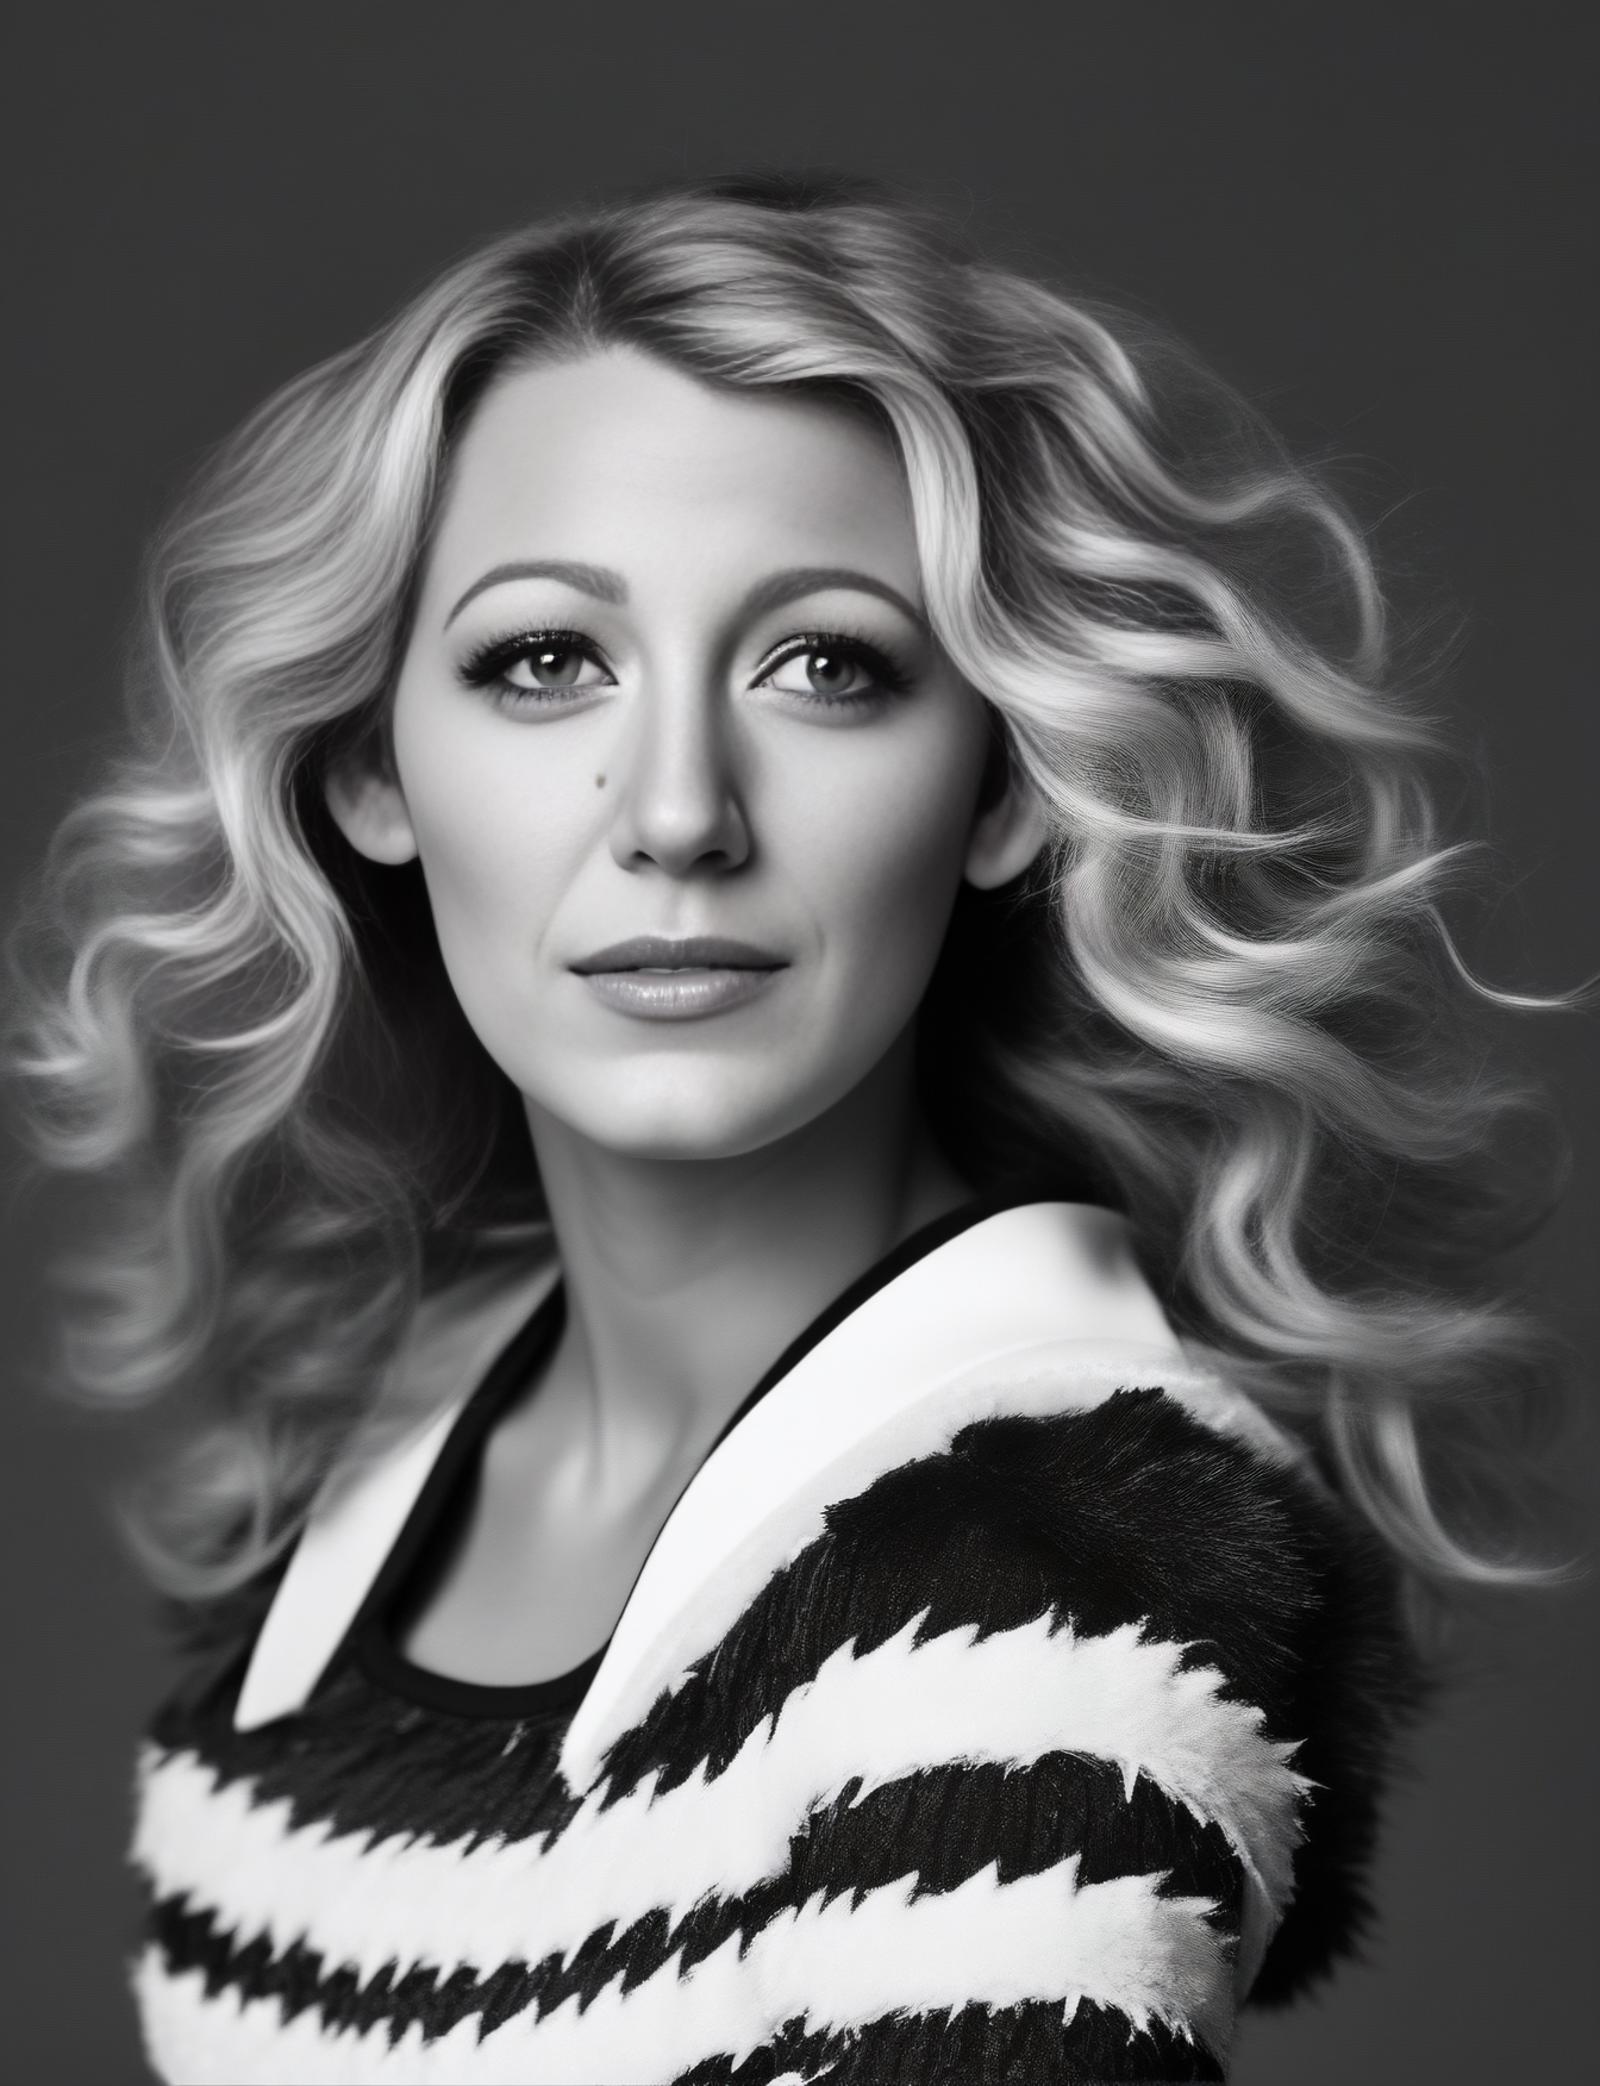 Blake Lively image by parar20